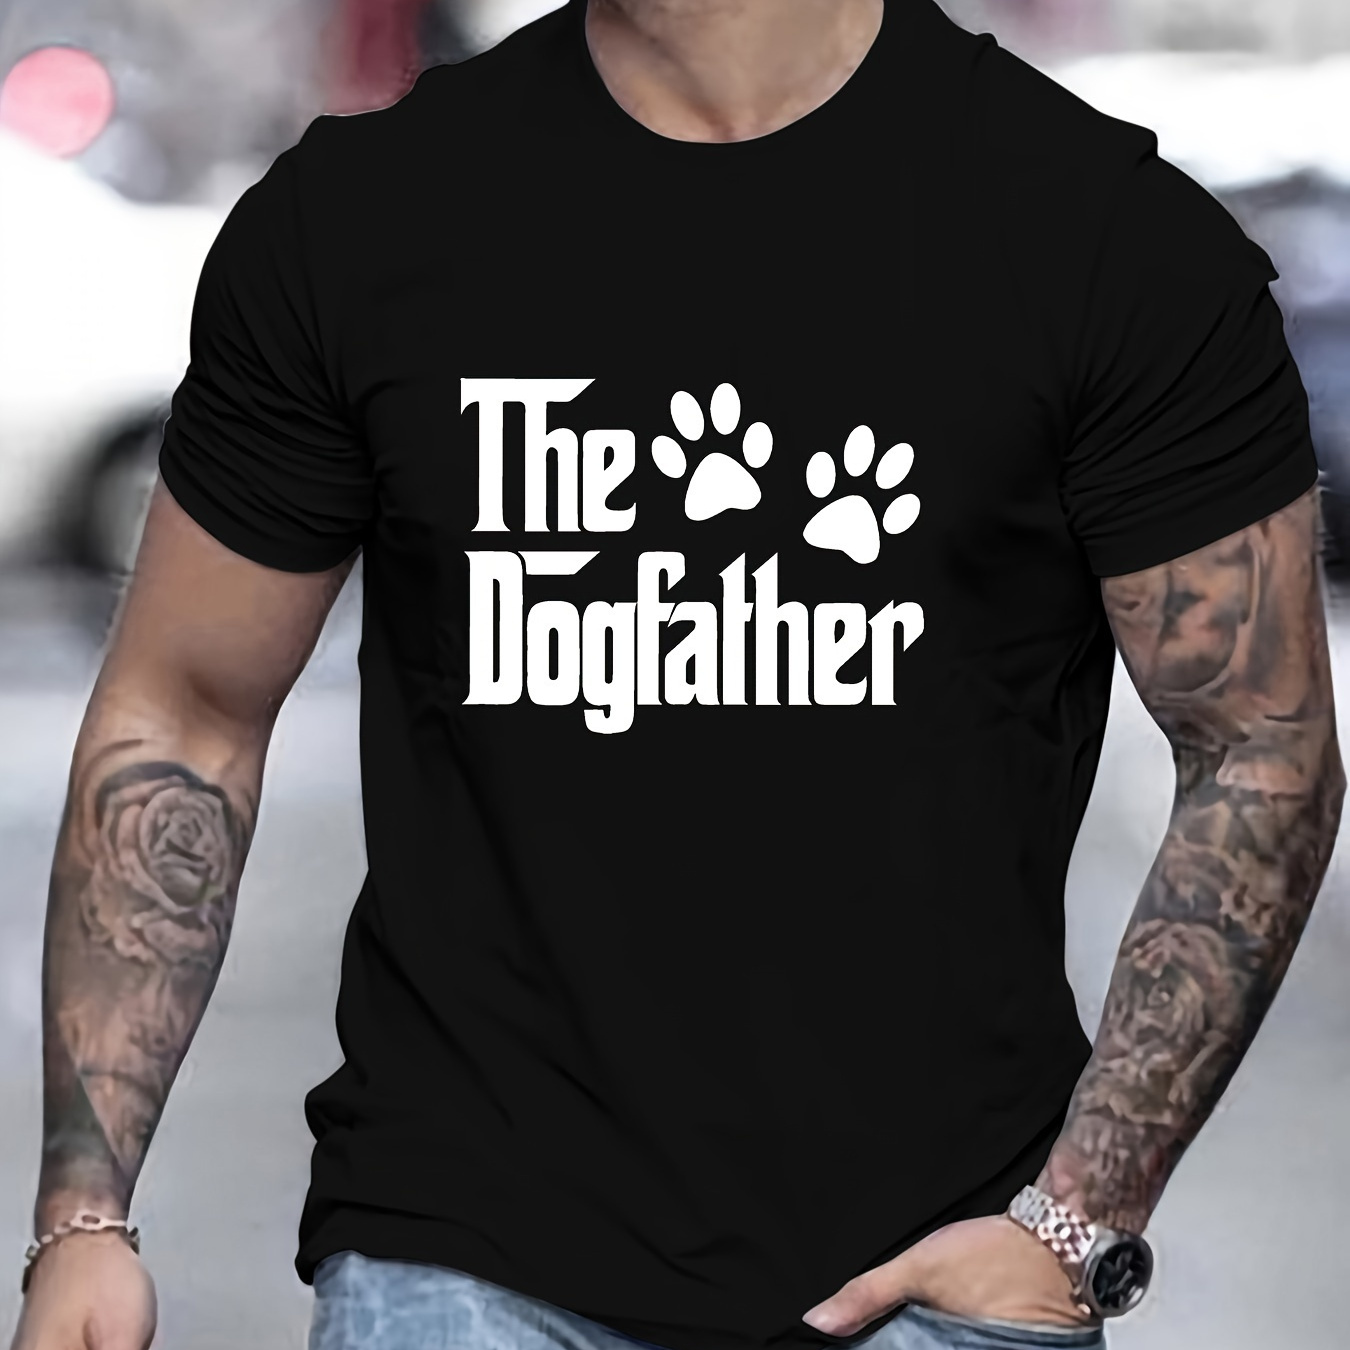 

The Dog Father Print T Shirt, Tees For Men, Casual Short Sleeve T-shirt For Summer